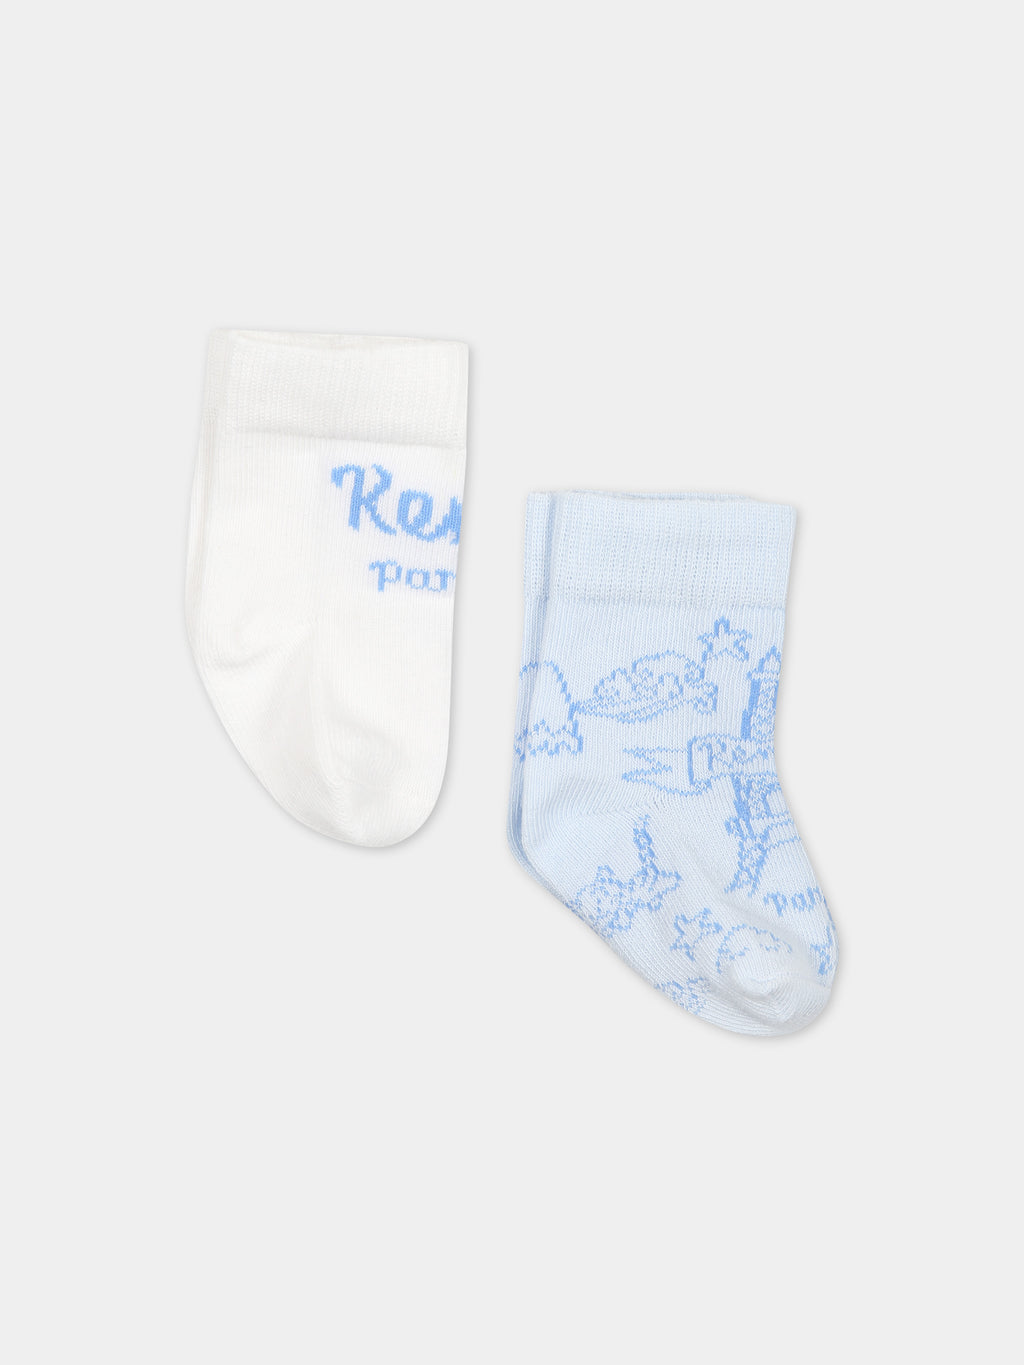 Socks set for baby boy with logo